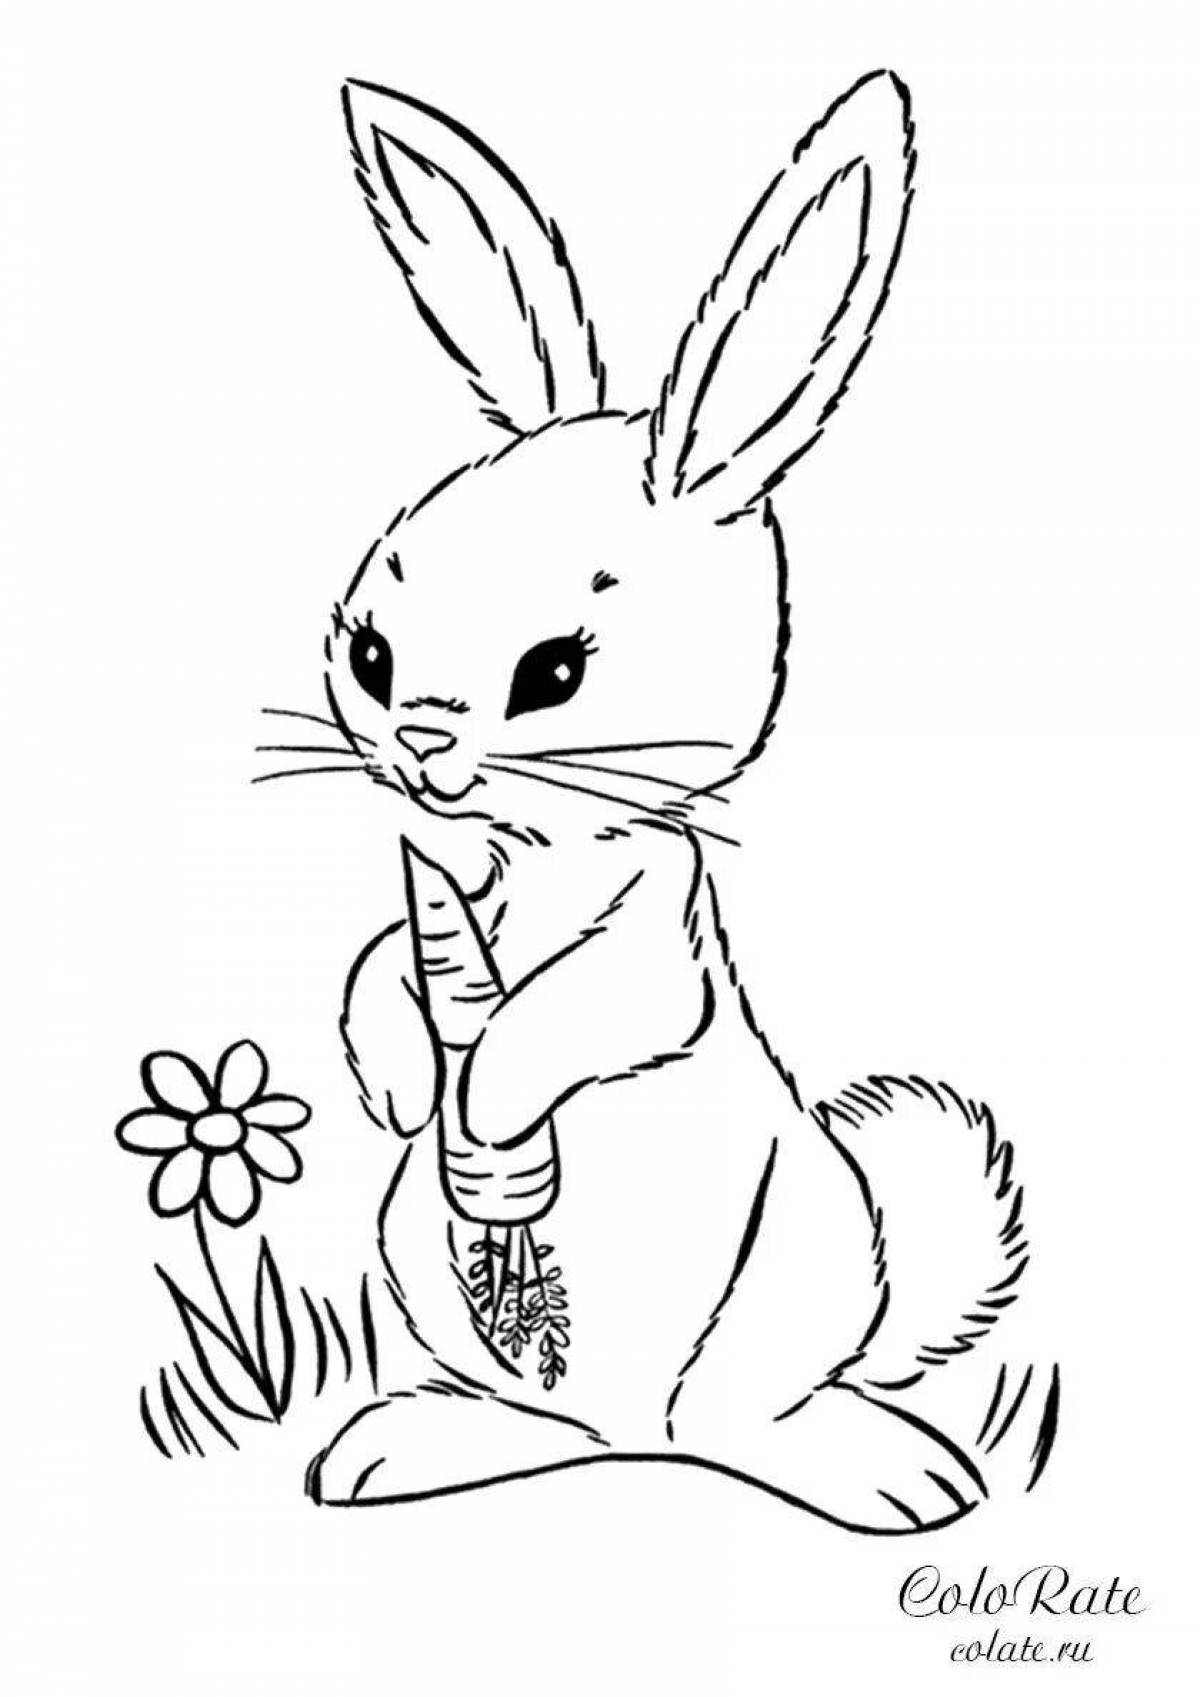 Witty rabbit coloring book